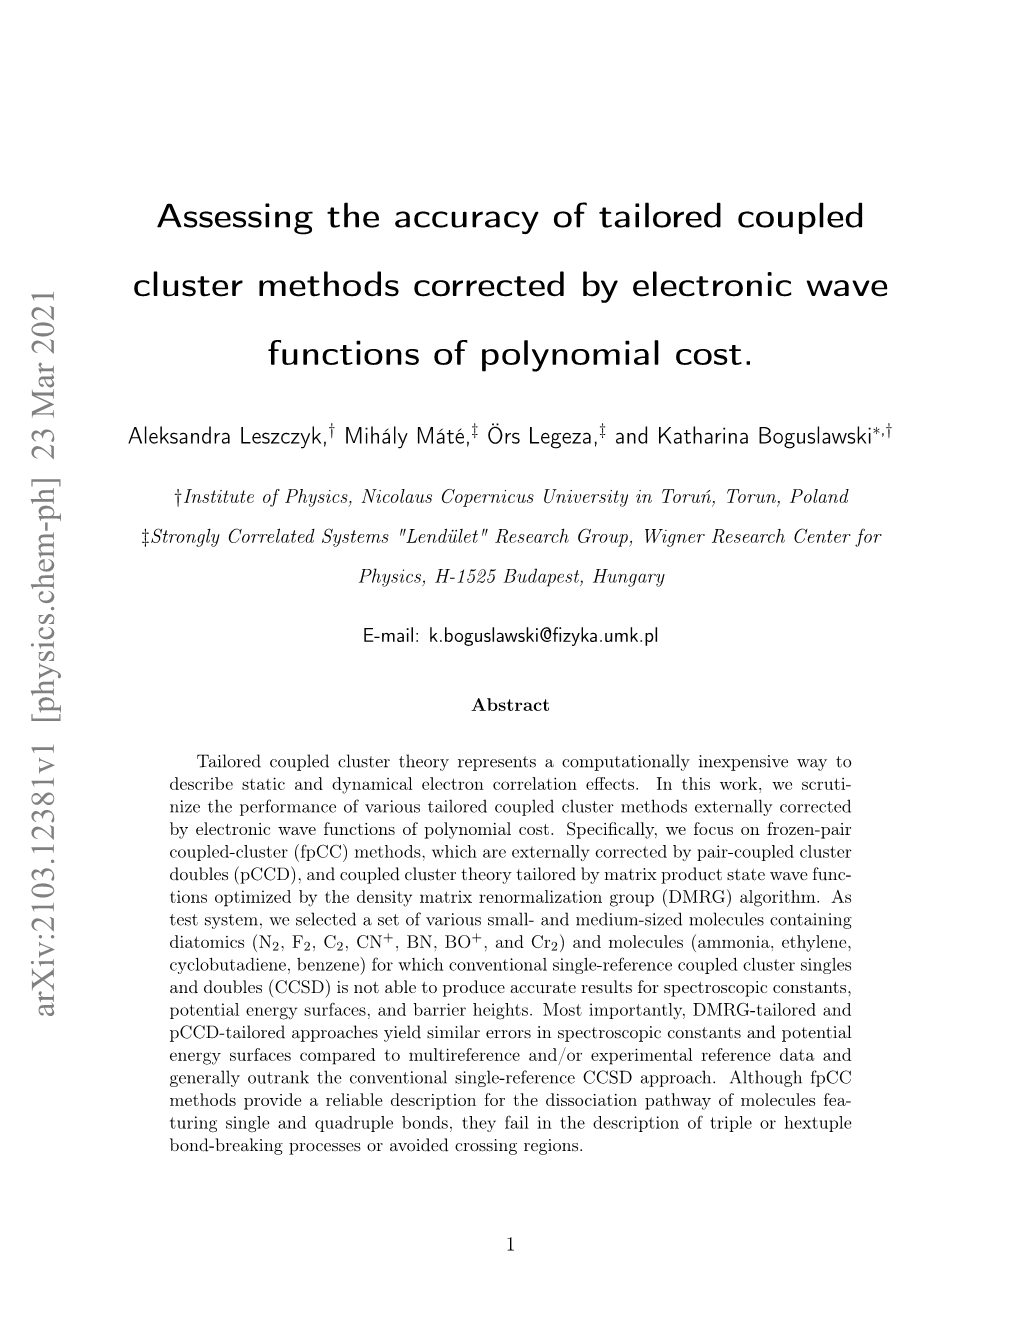 Assessing the Accuracy of Tailored Coupled Cluster Methods Corrected by Electronic Wave Functions of Polynomial Cost